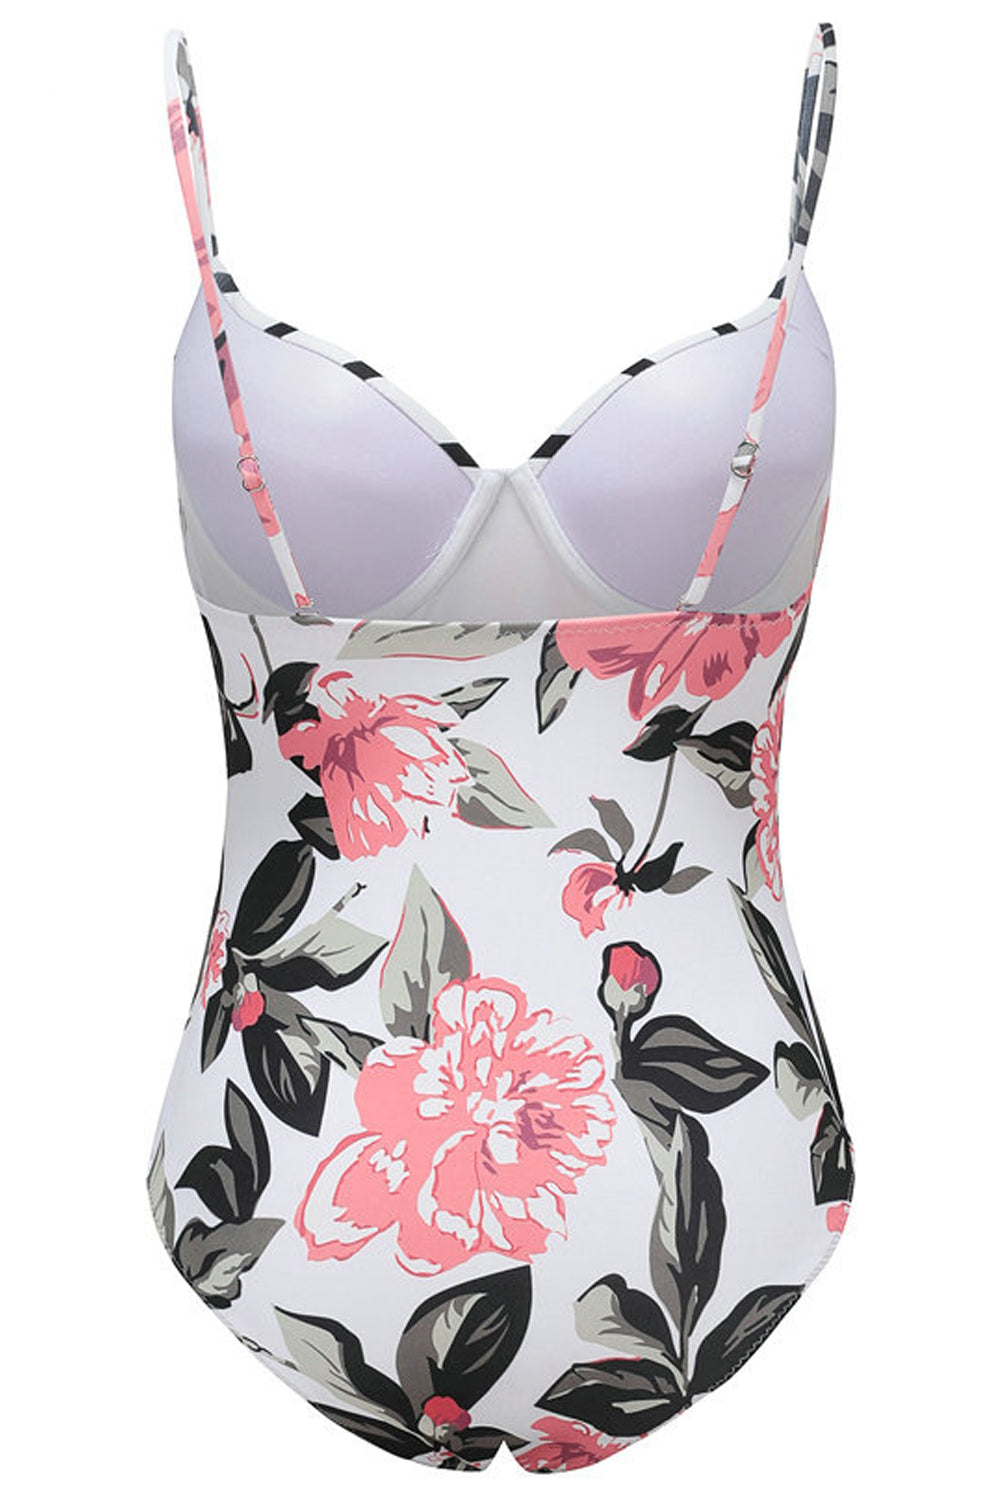 Iyasson Romantic Floral Print One-piece Swimsuit